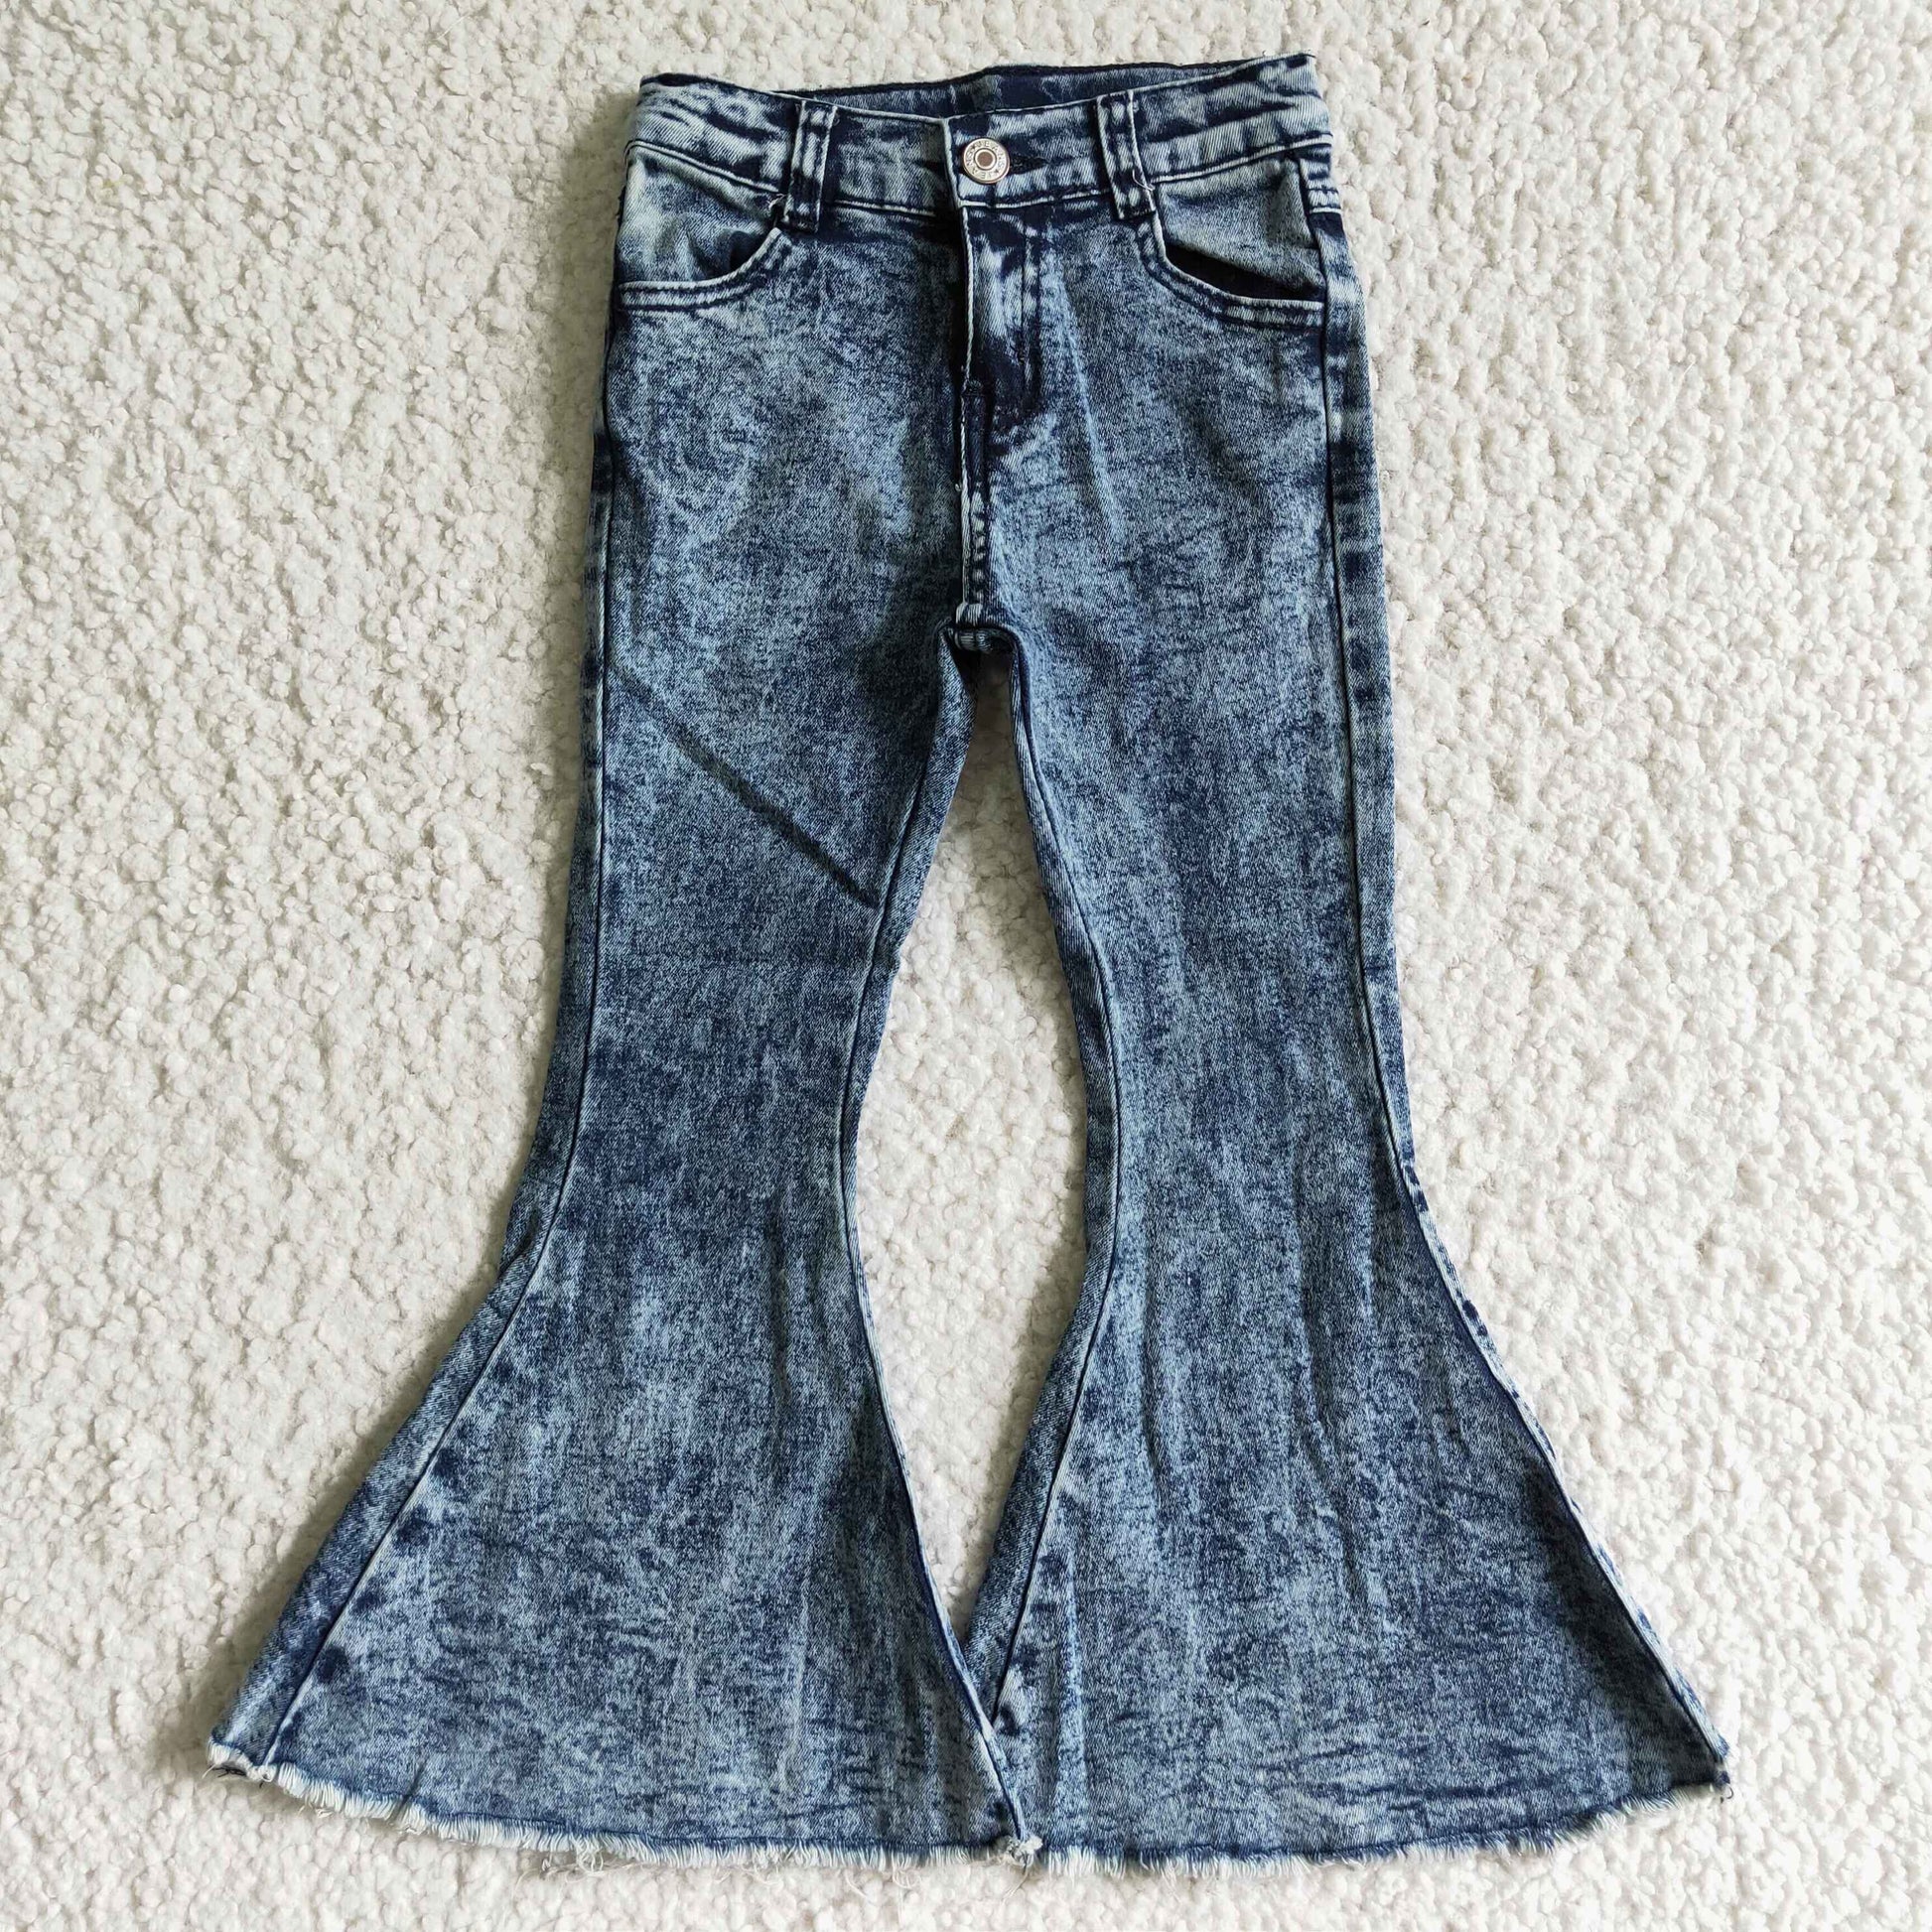 Mommy and me jeans kids girls denim pants – Western kids clothes